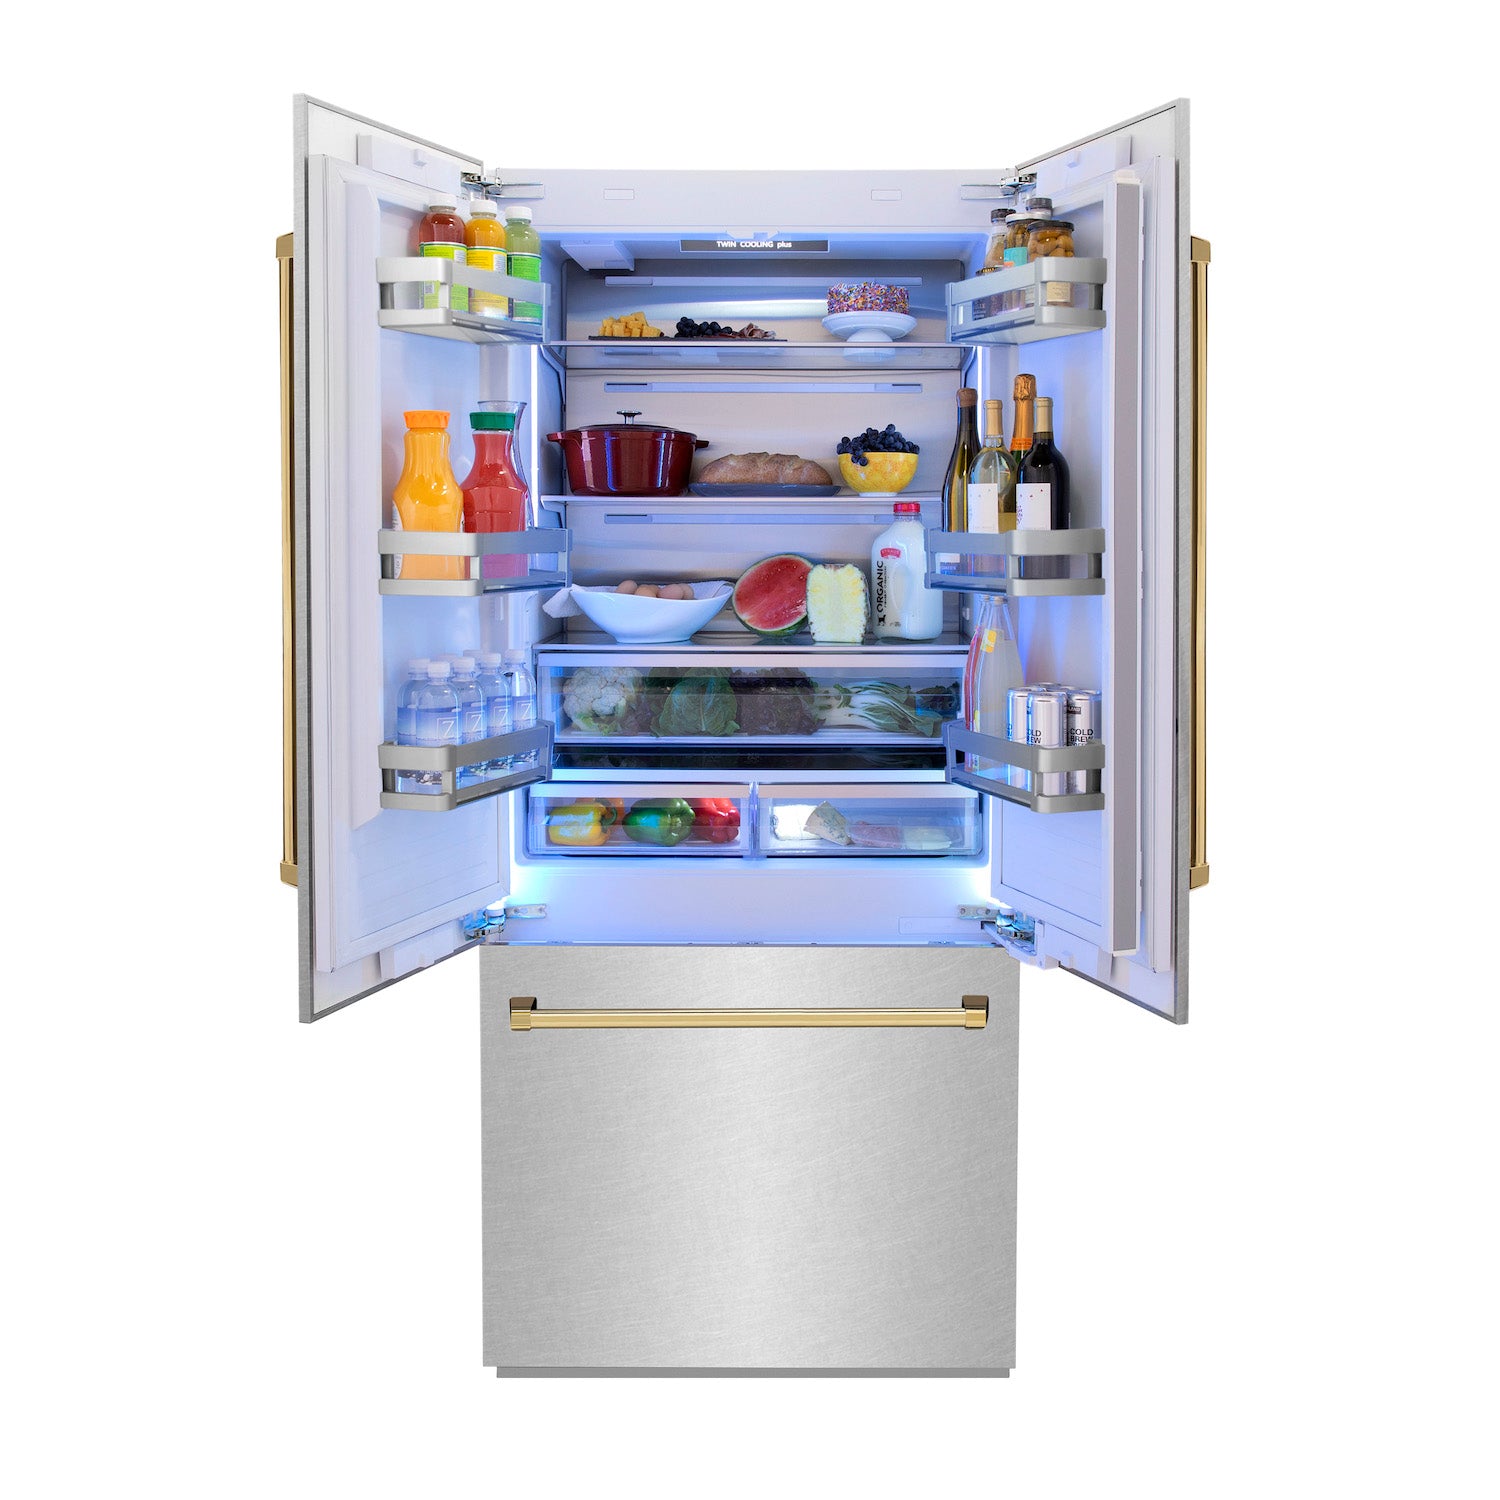 ZLINE Autograph Edition 36 in. 19.6 cu. ft. Built-in 2-Door Bottom Freezer Refrigerator with Internal Water and Ice Dispenser in Fingerprint Resistant Stainless Steel with Polished Gold Accents (RBIVZ-SN-36-G) front, open with food inside refrigeration compartment.